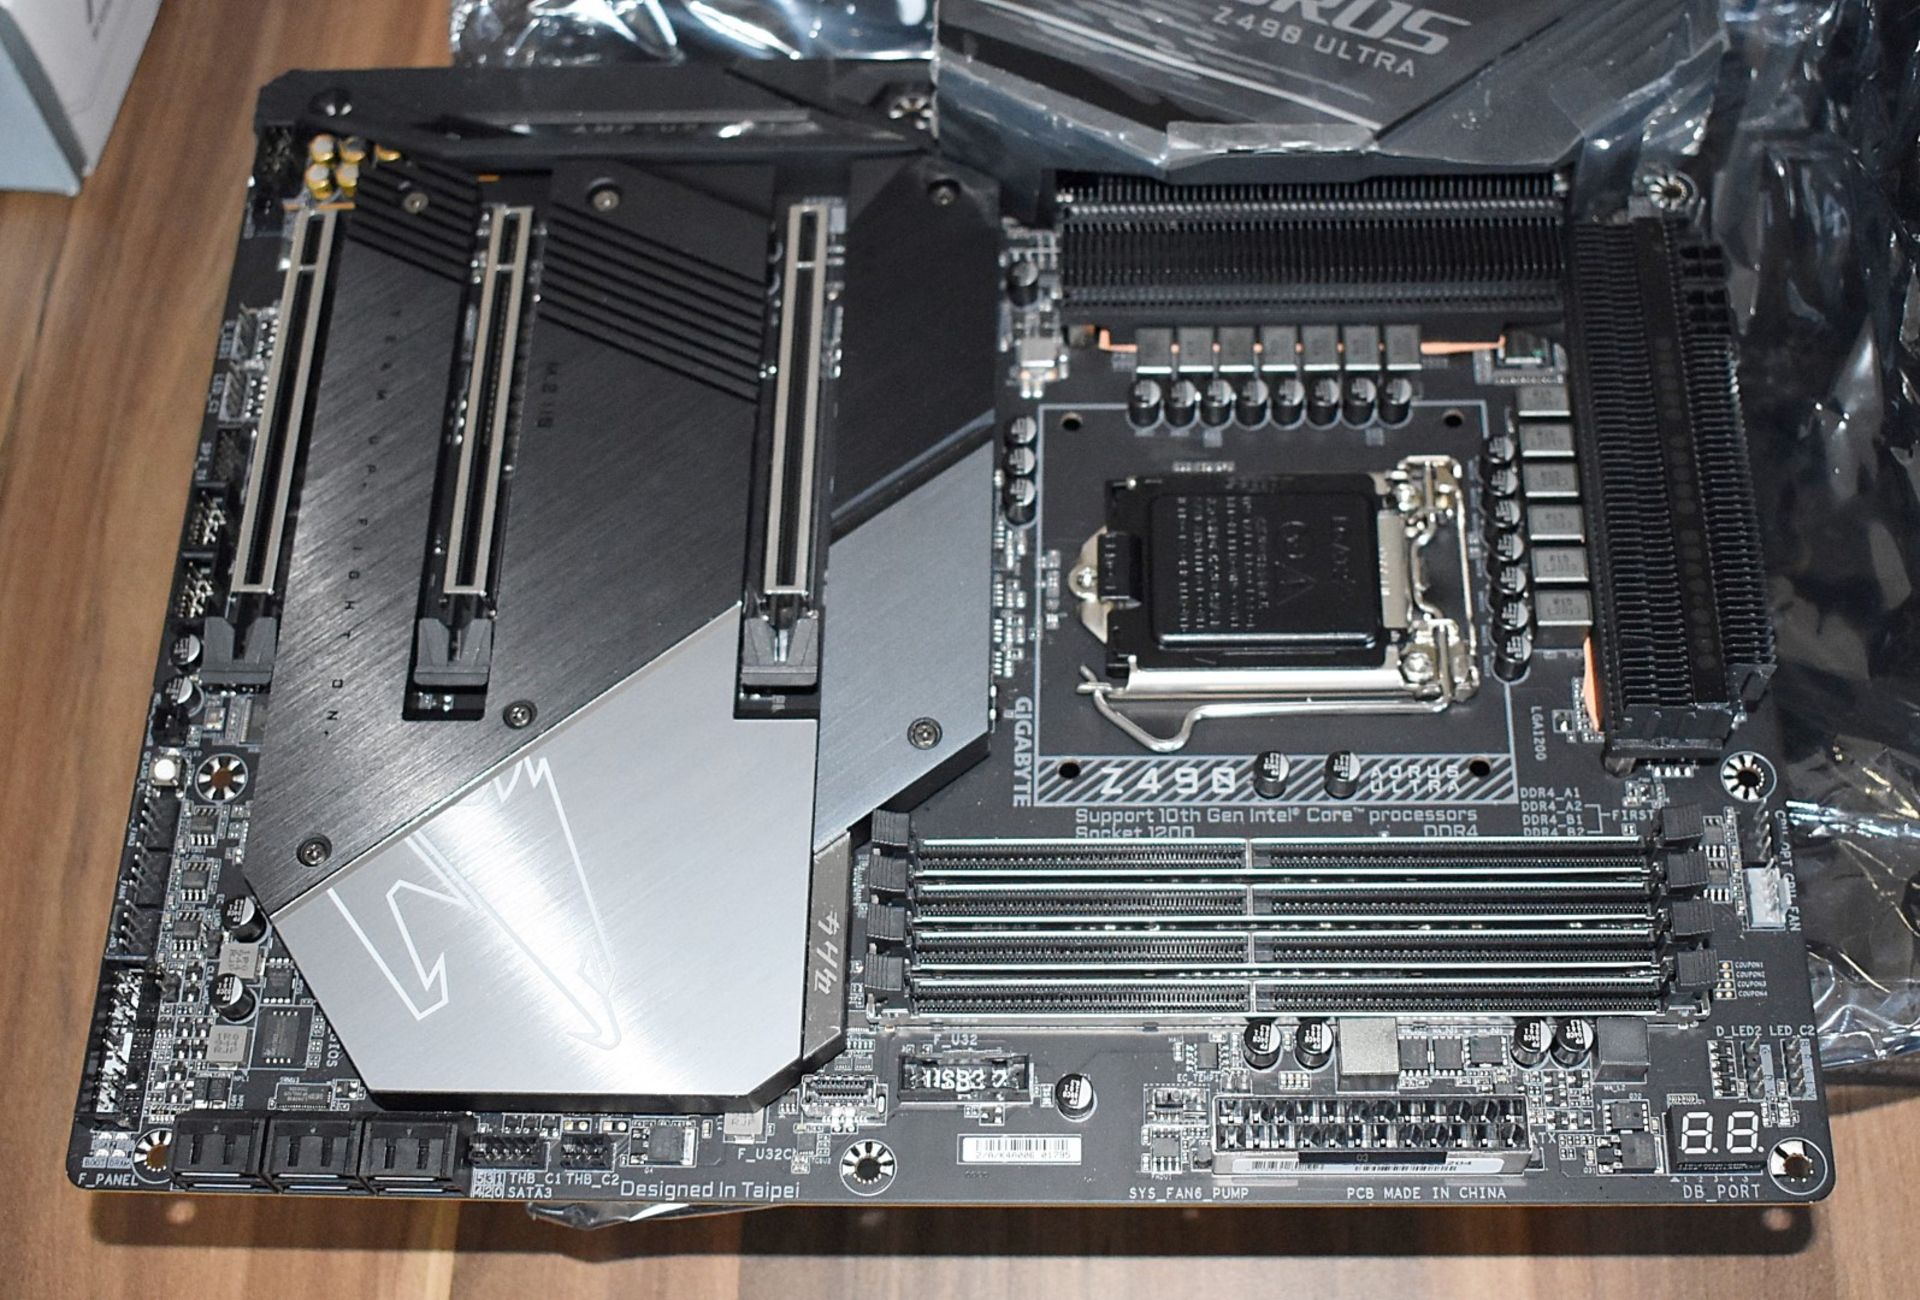 1 x Gigabyte Z490 Aorus Ultra Intel LGA1200 Gaming Motherboard - Open Boxed Stock With Accessories - Image 2 of 3